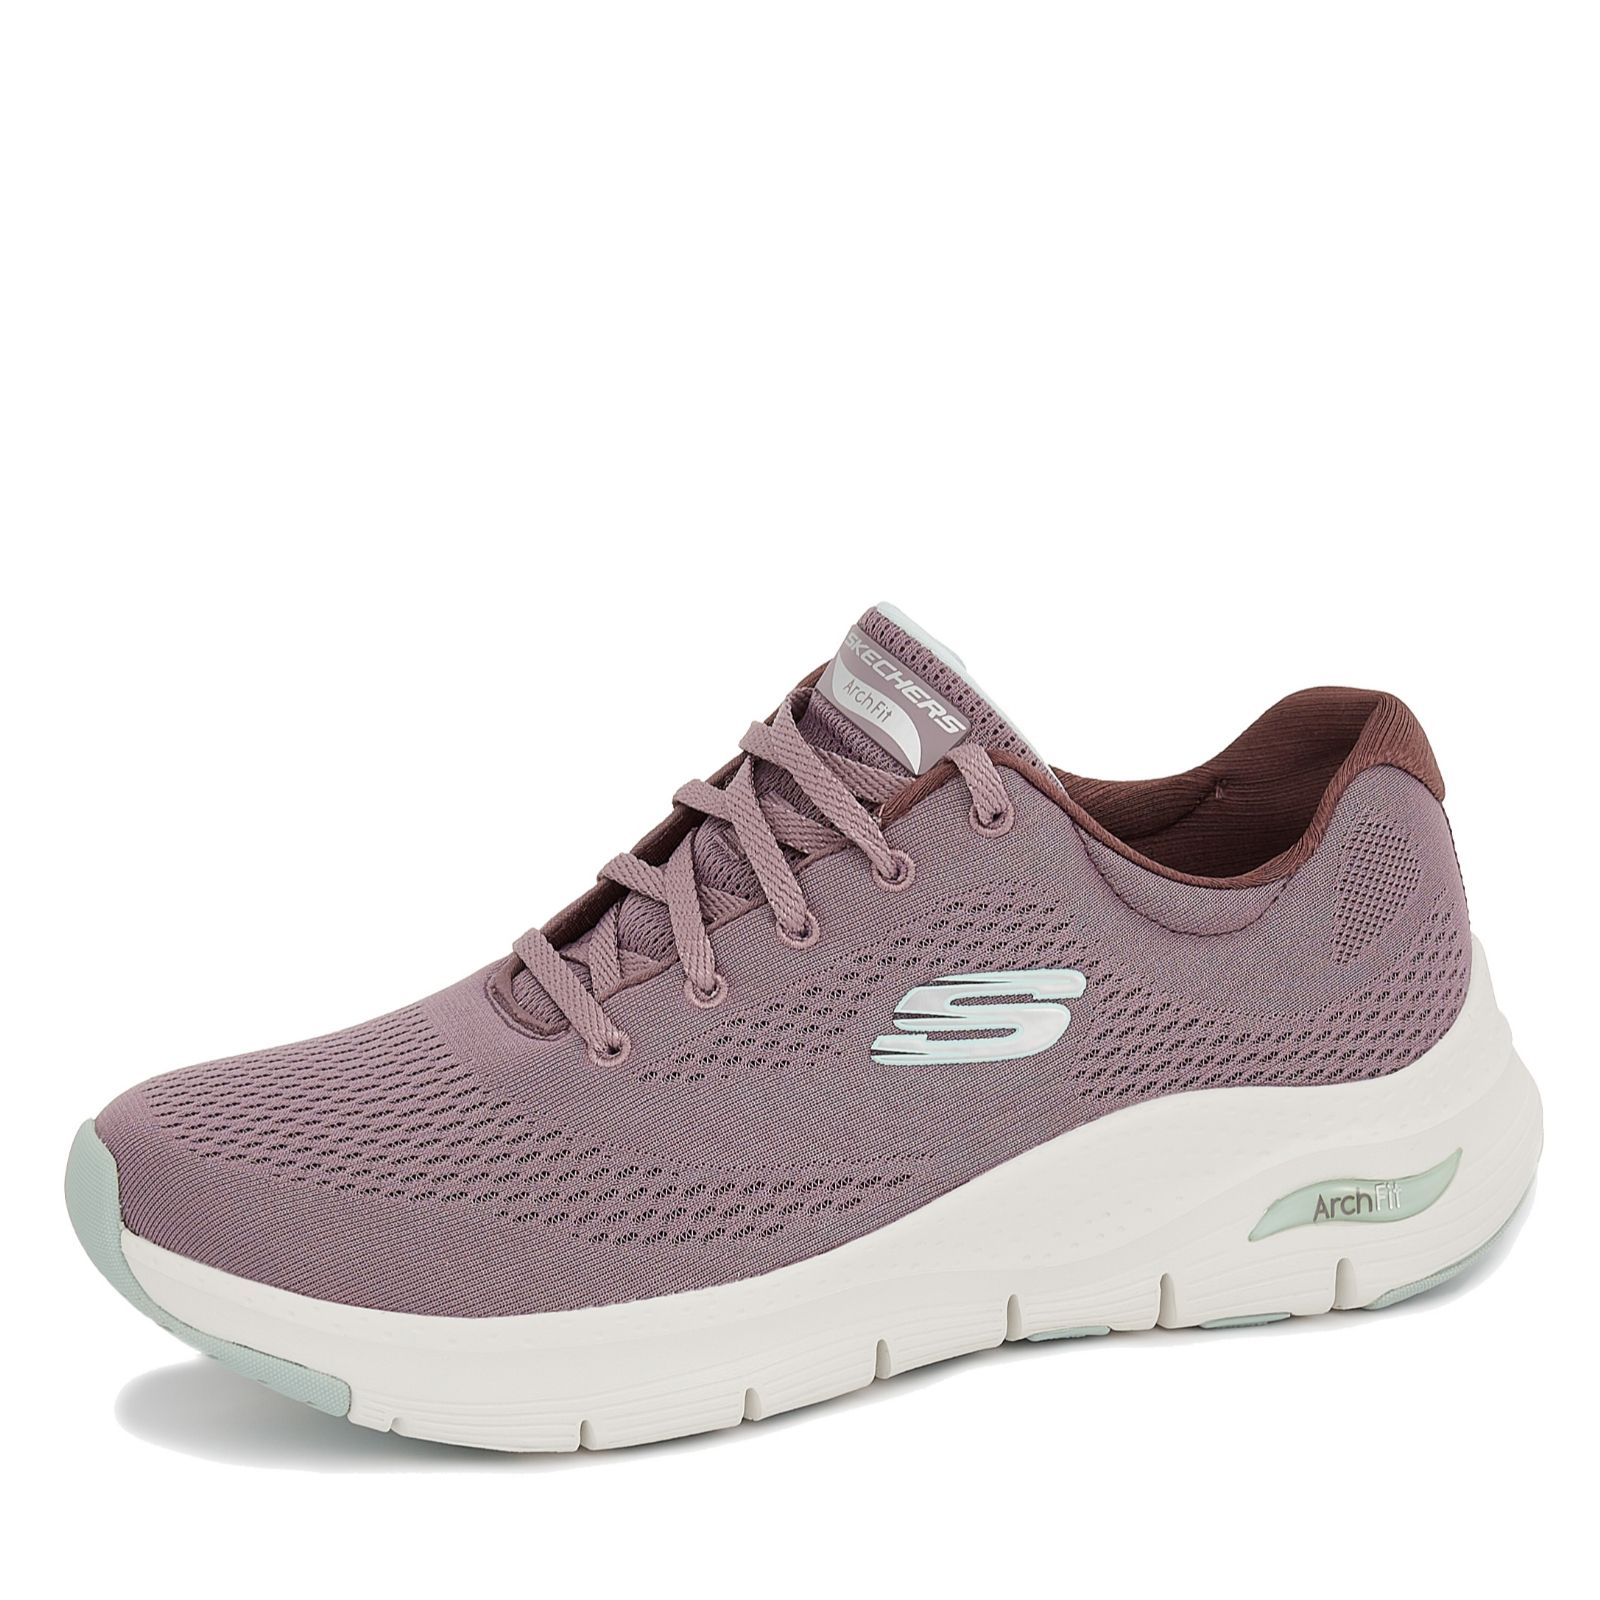 skechers with arch support uk